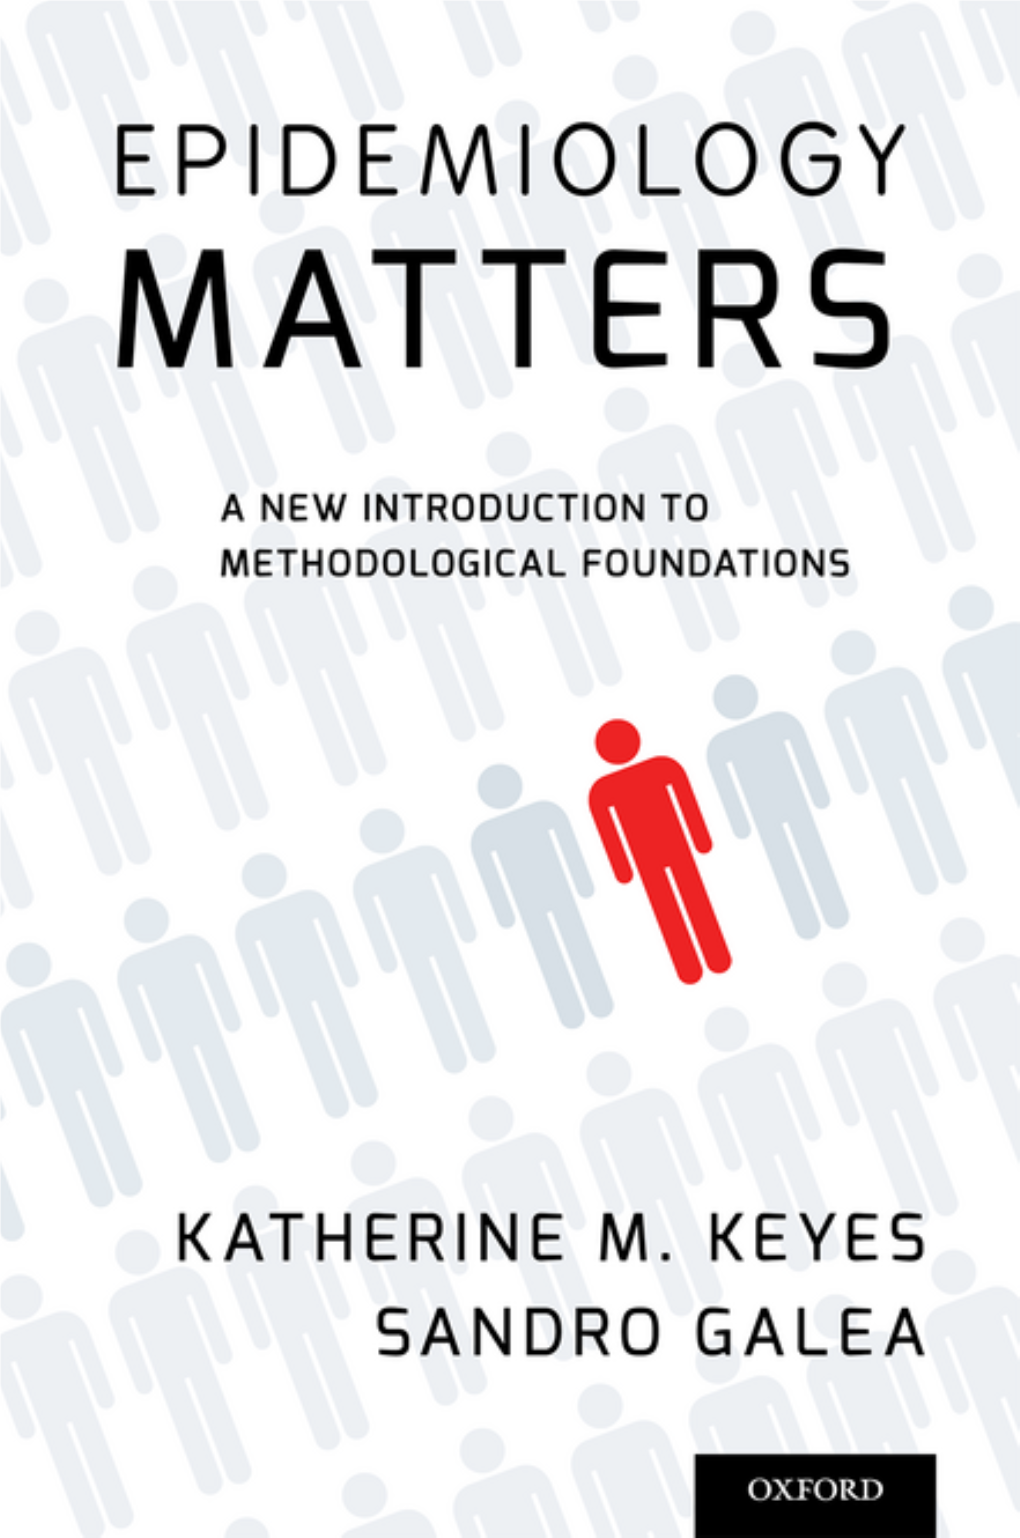 Epidemiology Matters : a New Introduction to Methodological Foundations / Katherine M